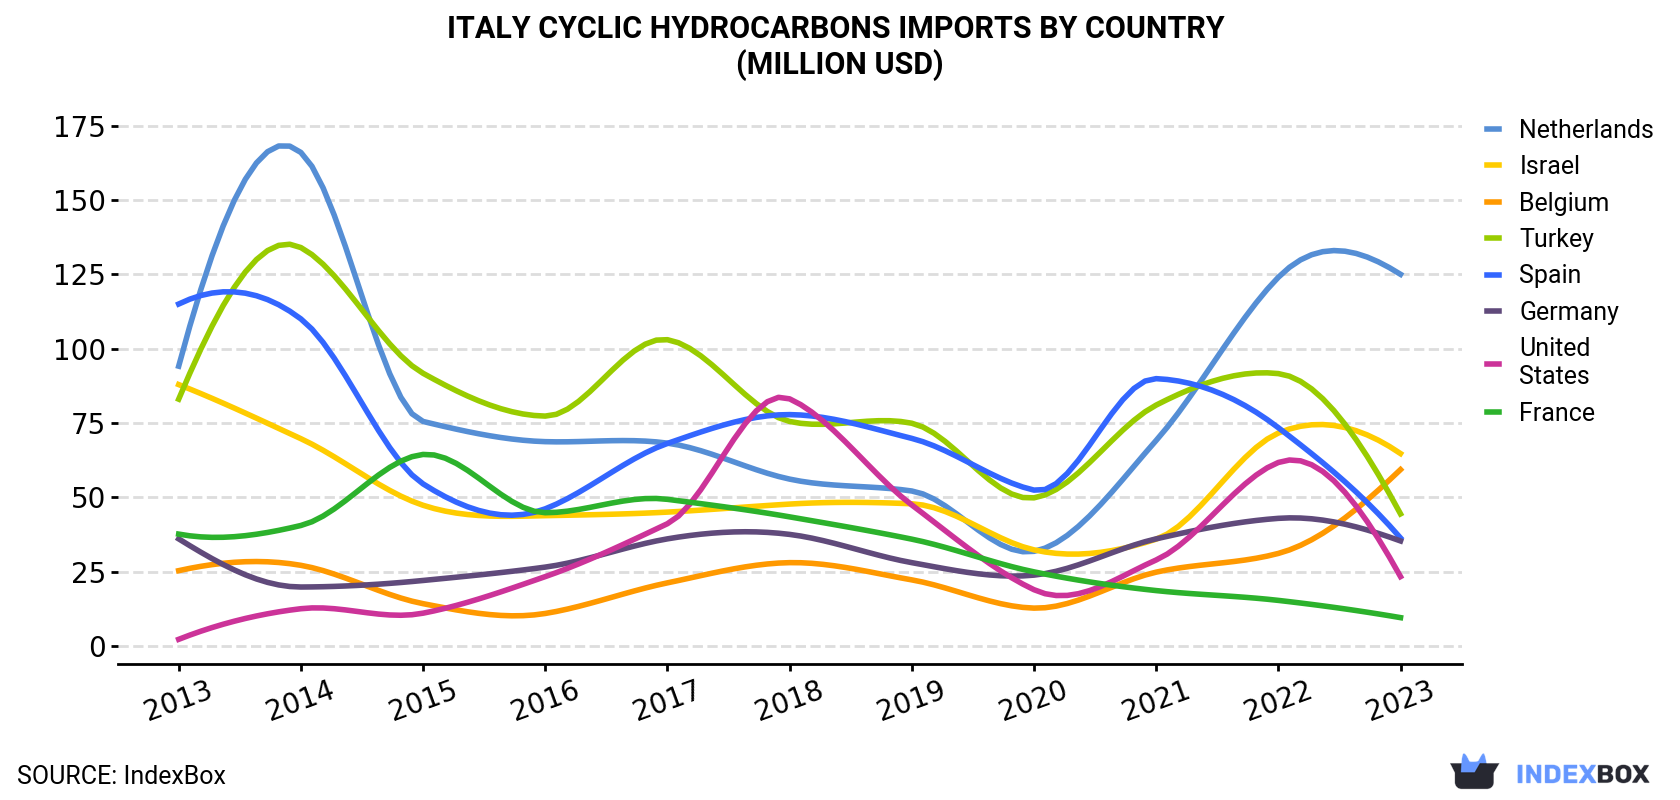 Italy Cyclic Hydrocarbons Imports By Country (Million USD)